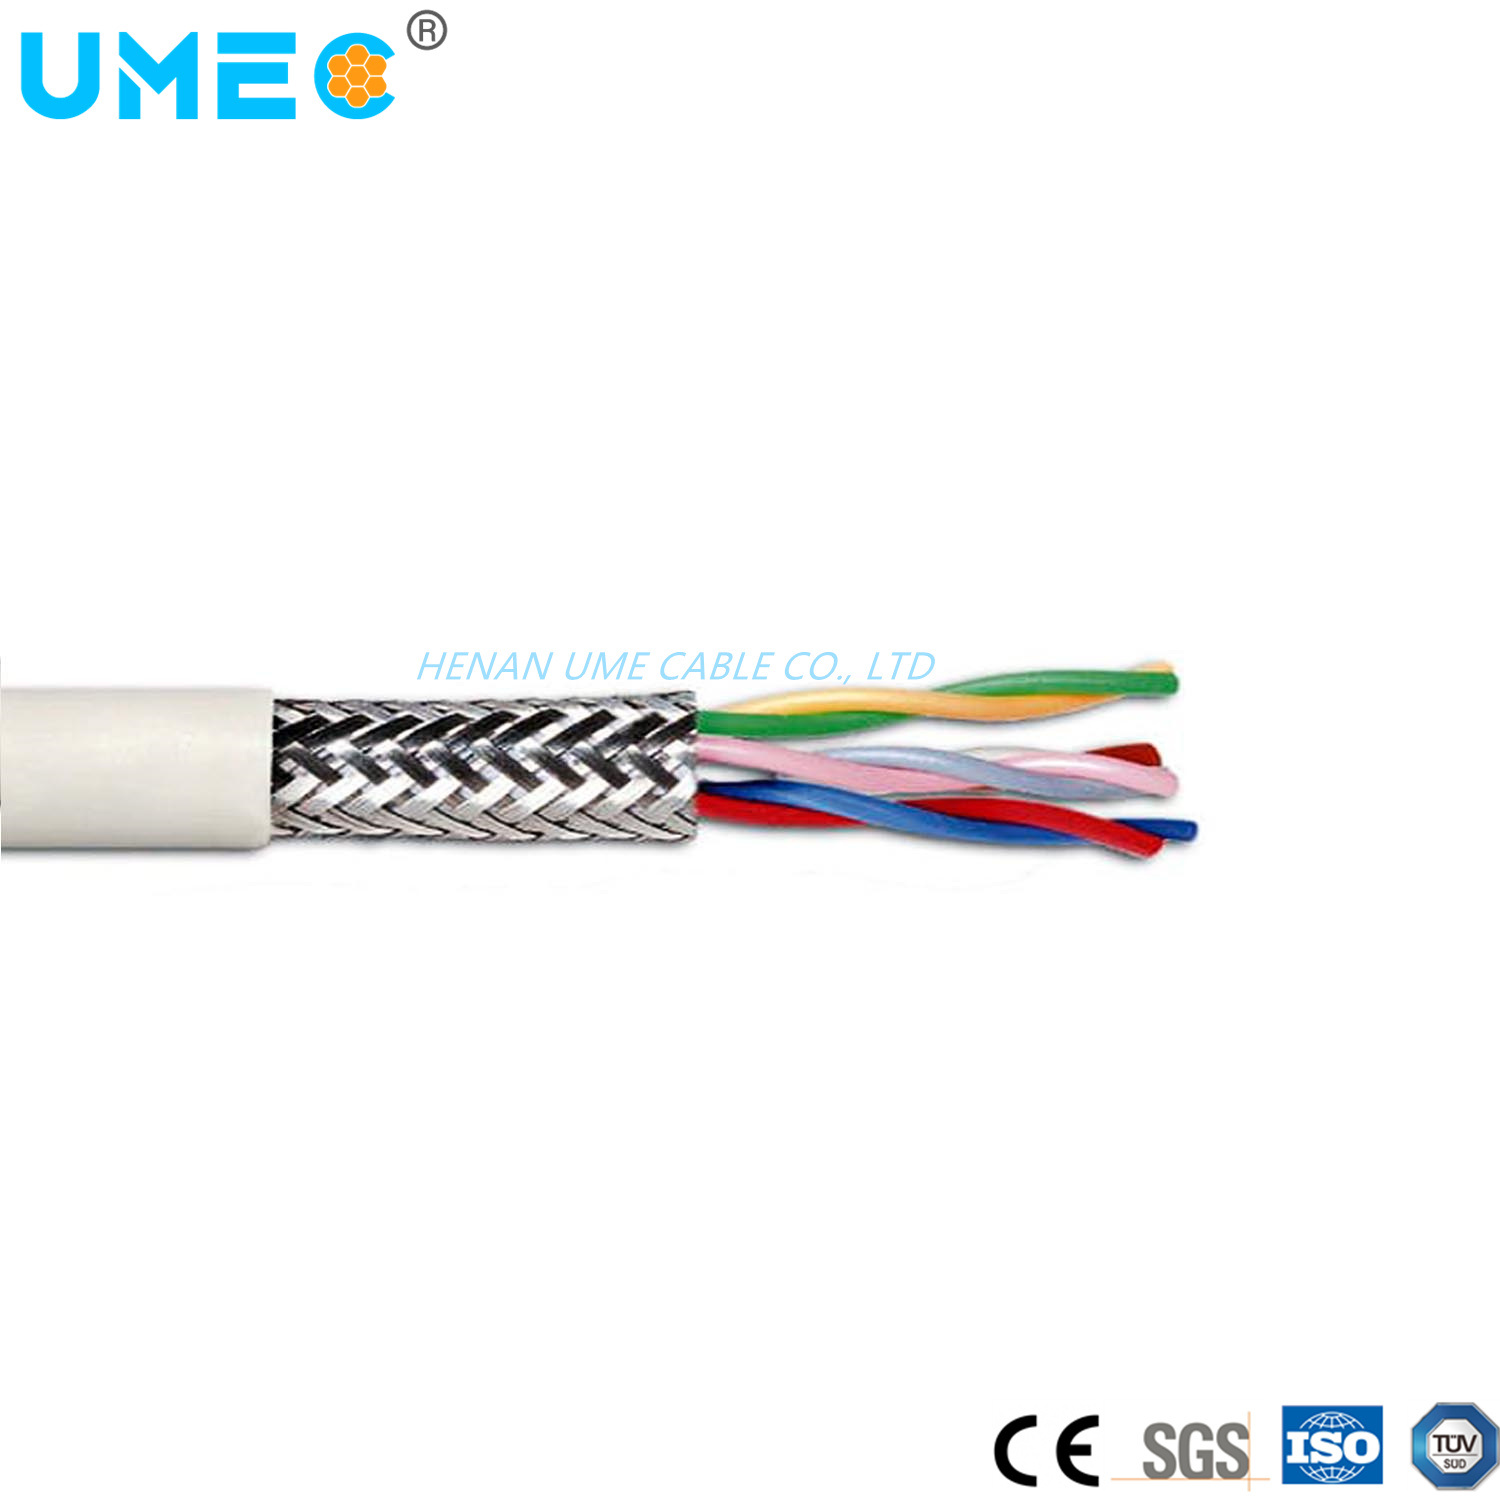 Liycy (TP) Liyy Cable Low Voltage 24AWG 22AWG 20AWG Special PVC Insulation and Jacket Braiding Control Cable